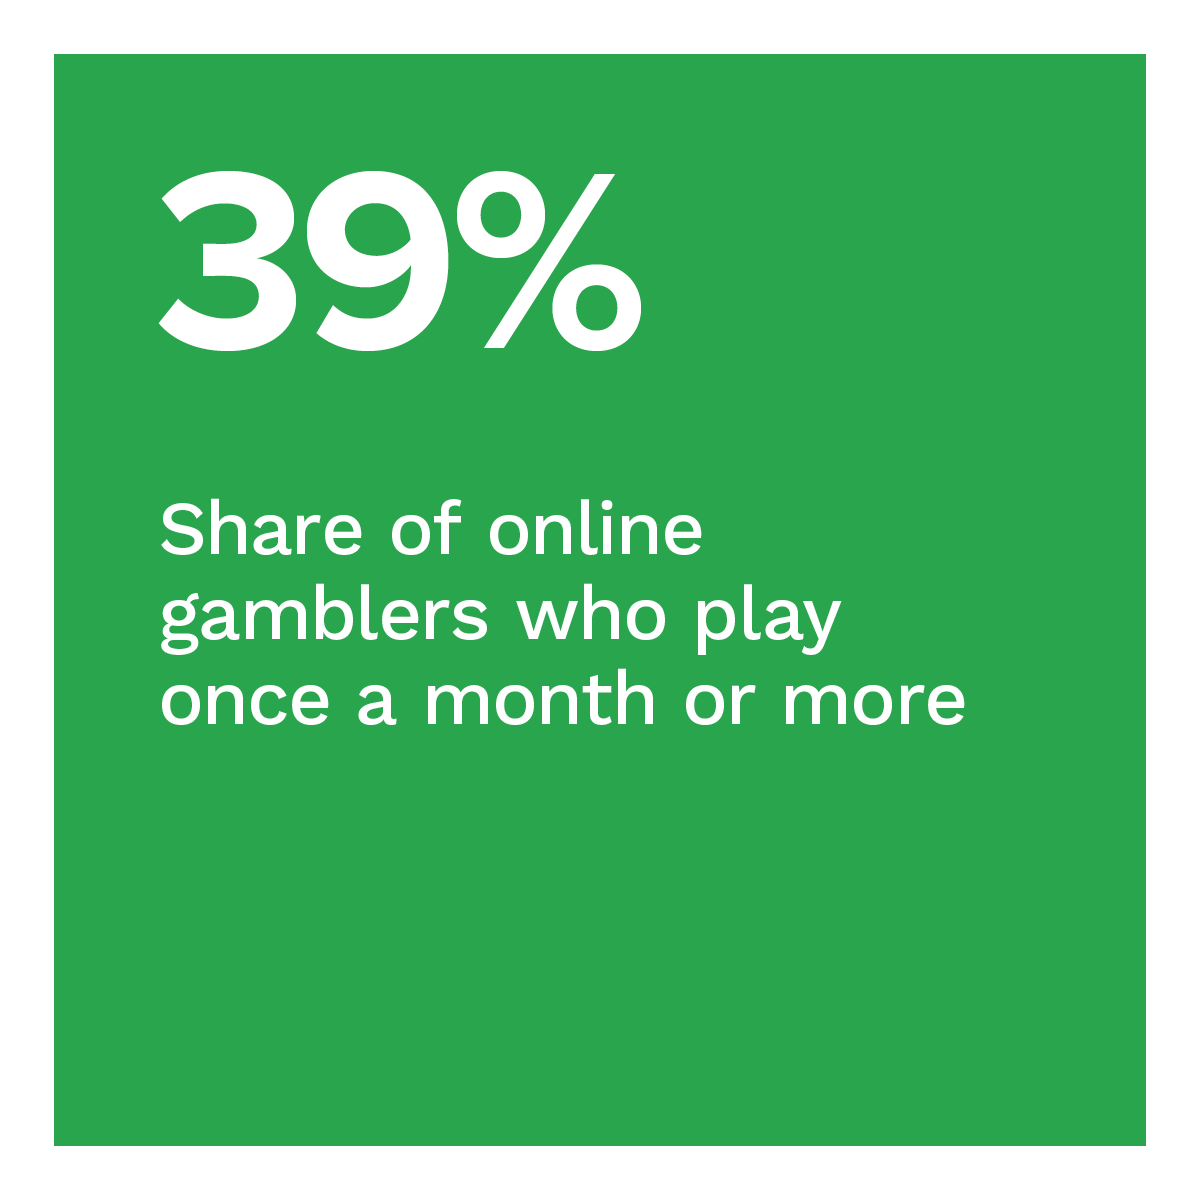 39%: Share of online gamblers who play once a month or more